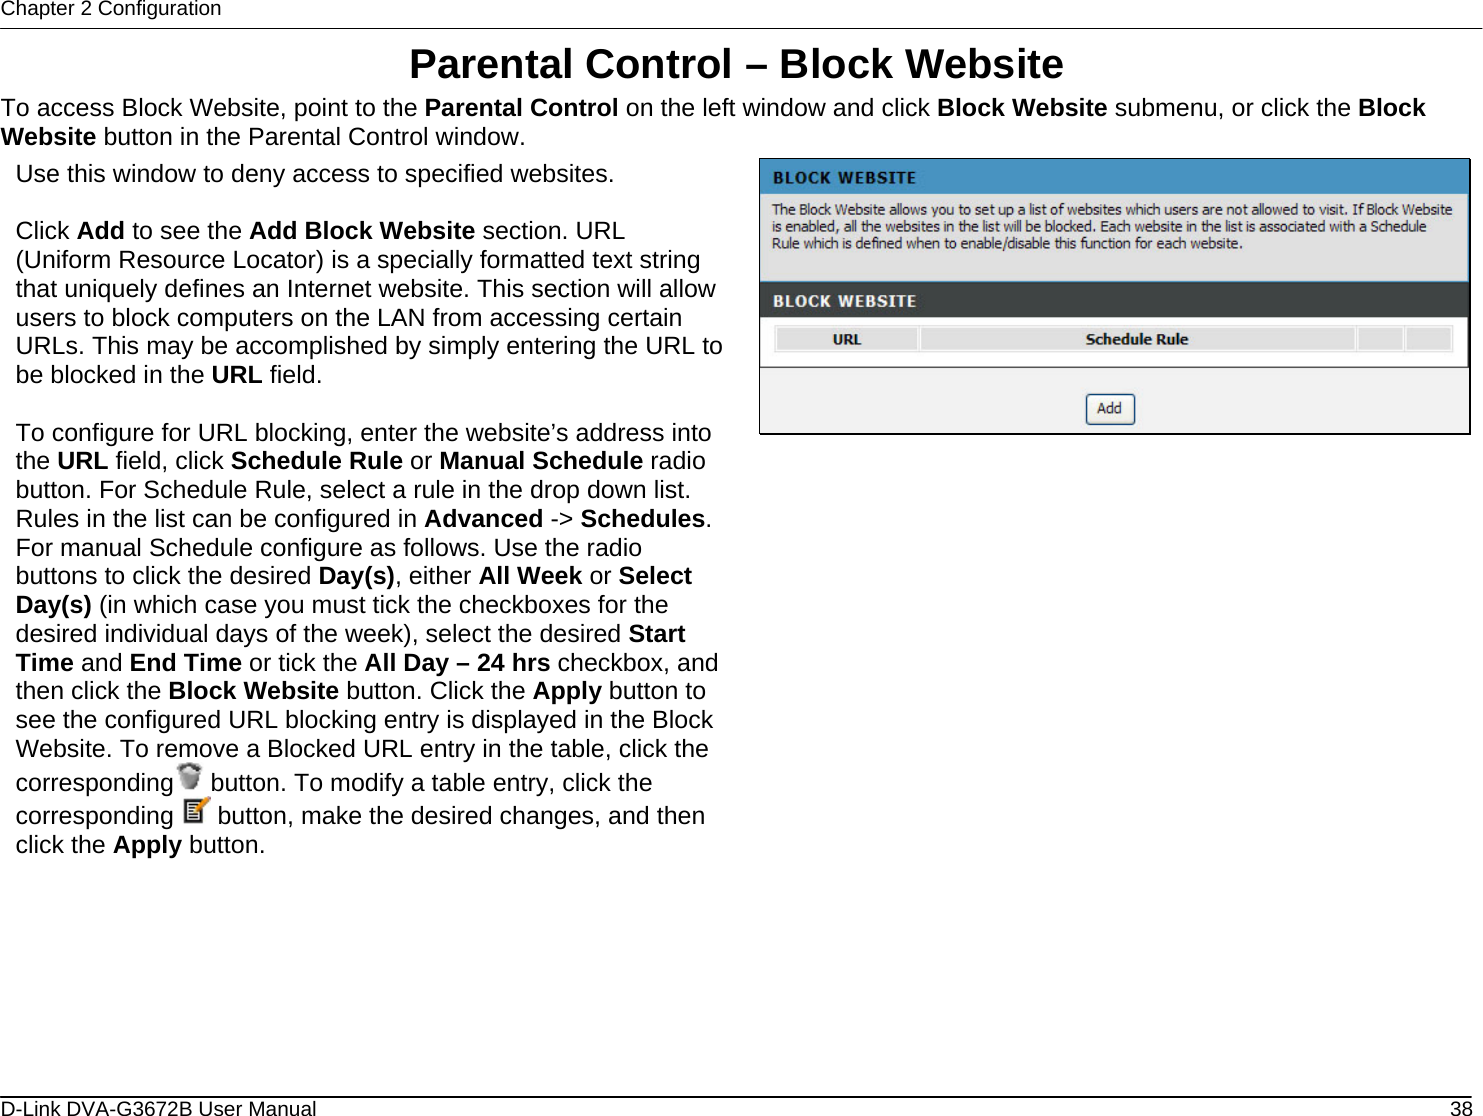 Chapter 2 Configuration Parental Control – Block Website To access Block Website, point to the Parental Control on the left window and click Block Website submenu, or click the Block Website button in the Parental Control window. Use this window to deny access to specified websites.  Click Add to see the Add Block Website section. URL (Uniform Resource Locator) is a specially formatted text string that uniquely defines an Internet website. This section will allow users to block computers on the LAN from accessing certain URLs. This may be accomplished by simply entering the URL to be blocked in the URL field.   To configure for URL blocking, enter the website’s address into the URL field, click Schedule Rule or Manual Schedule radio button. For Schedule Rule, select a rule in the drop down list. Rules in the list can be configured in Advanced -&gt; Schedules. For manual Schedule configure as follows. Use the radio buttons to click the desired Day(s), either All Week or Select Day(s) (in which case you must tick the checkboxes for the desired individual days of the week), select the desired Start Time and End Time or tick the All Day – 24 hrs checkbox, and then click the Block Website button. Click the Apply button to see the configured URL blocking entry is displayed in the Block Website. To remove a Blocked URL entry in the table, click the corresponding  button. To modify a table entry, click the corresponding   button, make the desired changes, and then click the Apply button.                         D-Link DVA-G3672B User Manual  38